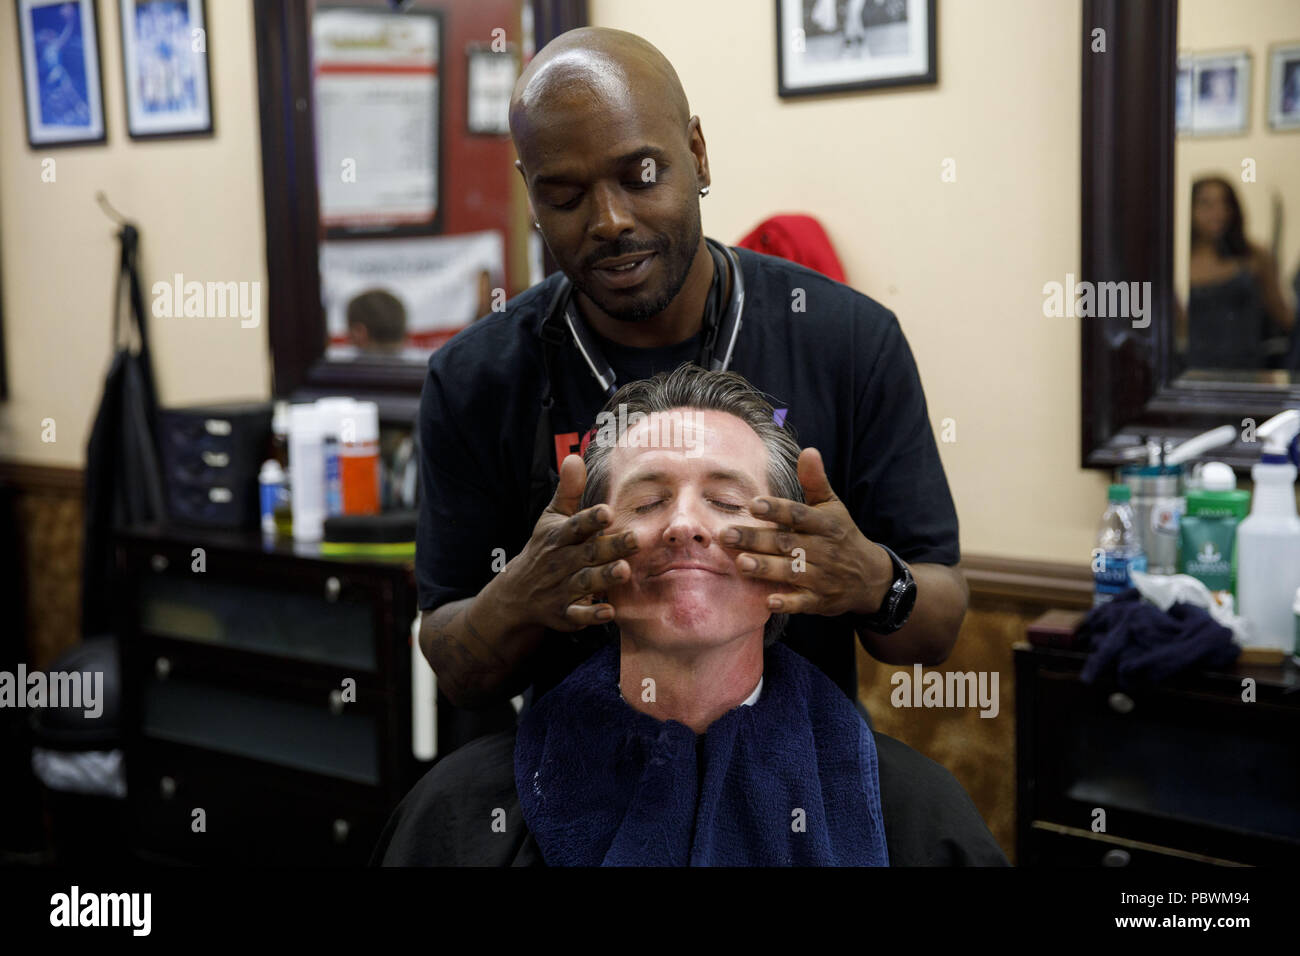 Los Angeles, California, USA. 31st May, 2018. Gavin Newsom, Democractic  candidate for governor of California, receives a shave from barber Brandon  Thomas during a campaign visit at the Stakely's Barber Salon with